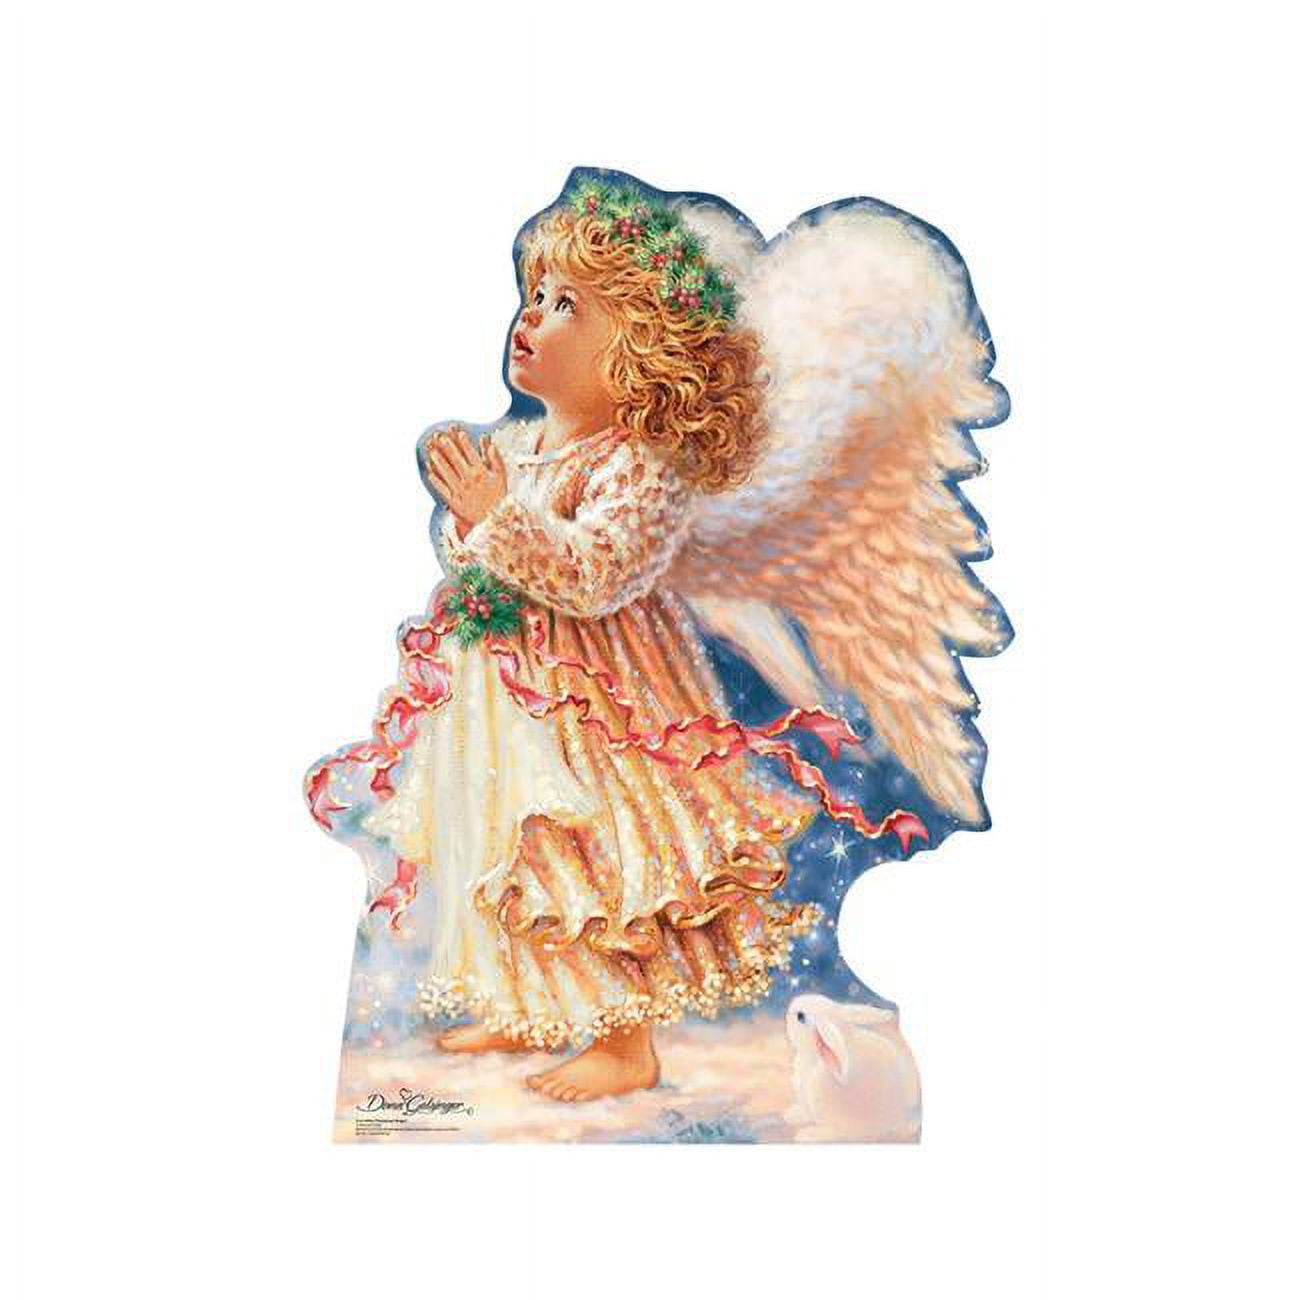 Picture of Advanced Graphics 2110 48 x 35 in. Little Christmas Angel - Dona Gelsinger Art Cardboard Standup